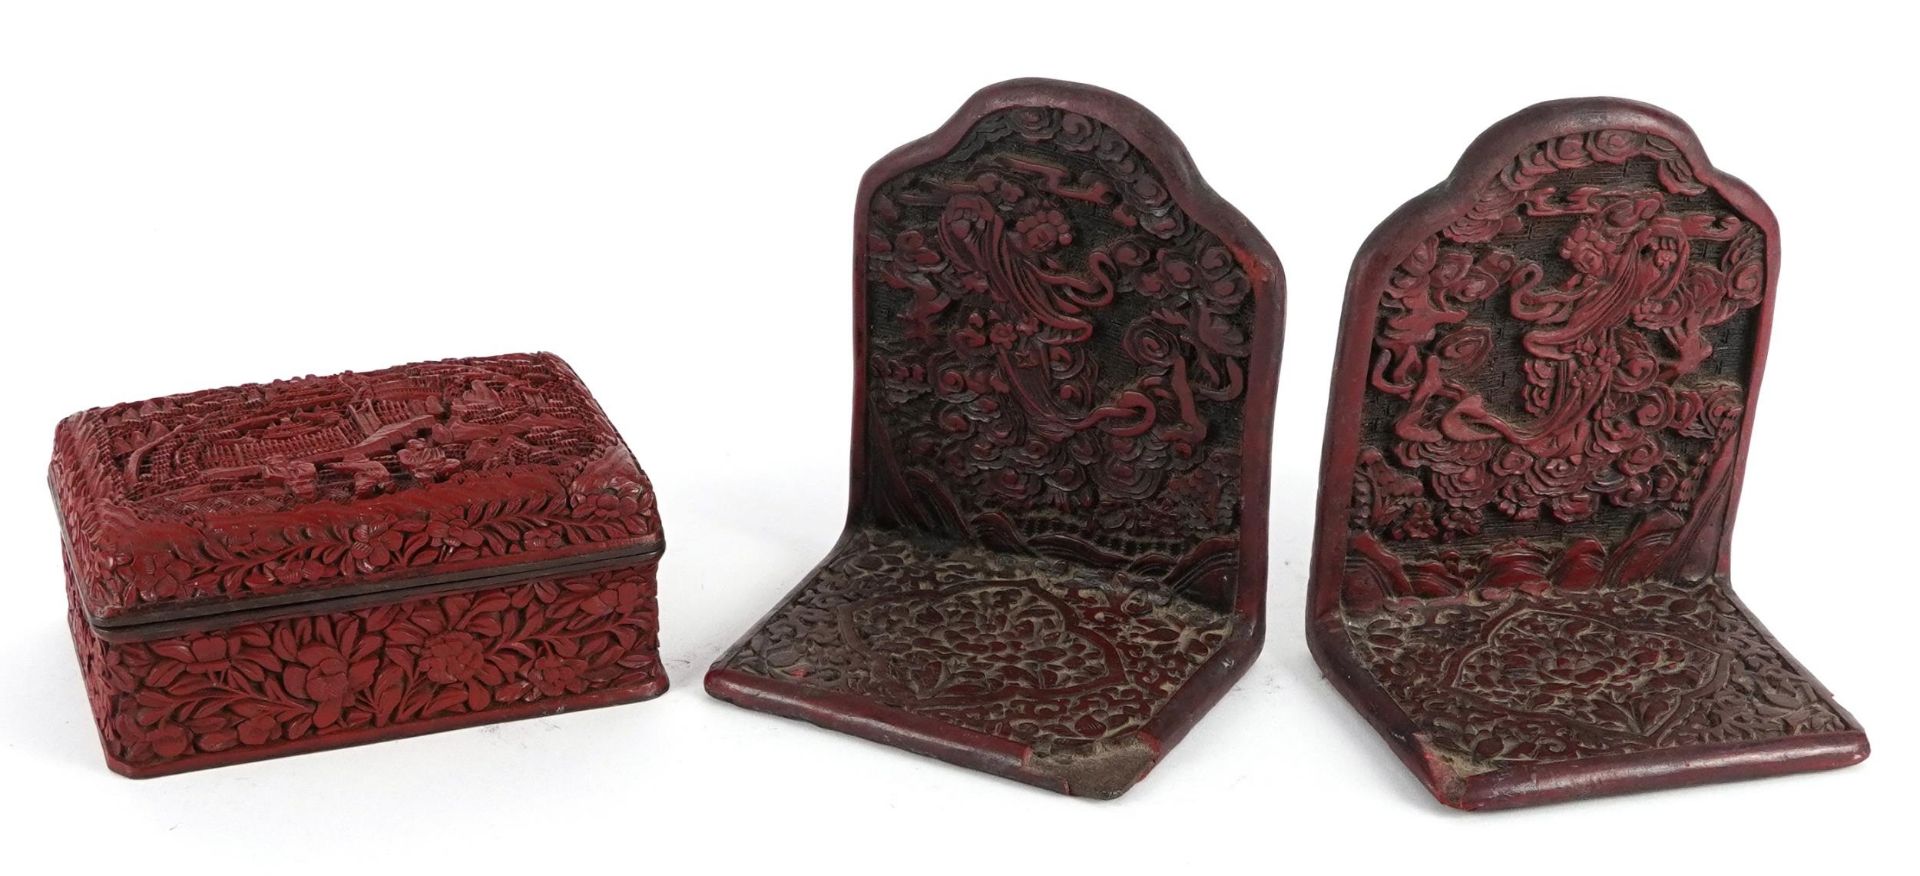 Pair of Chinese cinnabar lacquered bookends and a box and cover carved with figures in a landscape